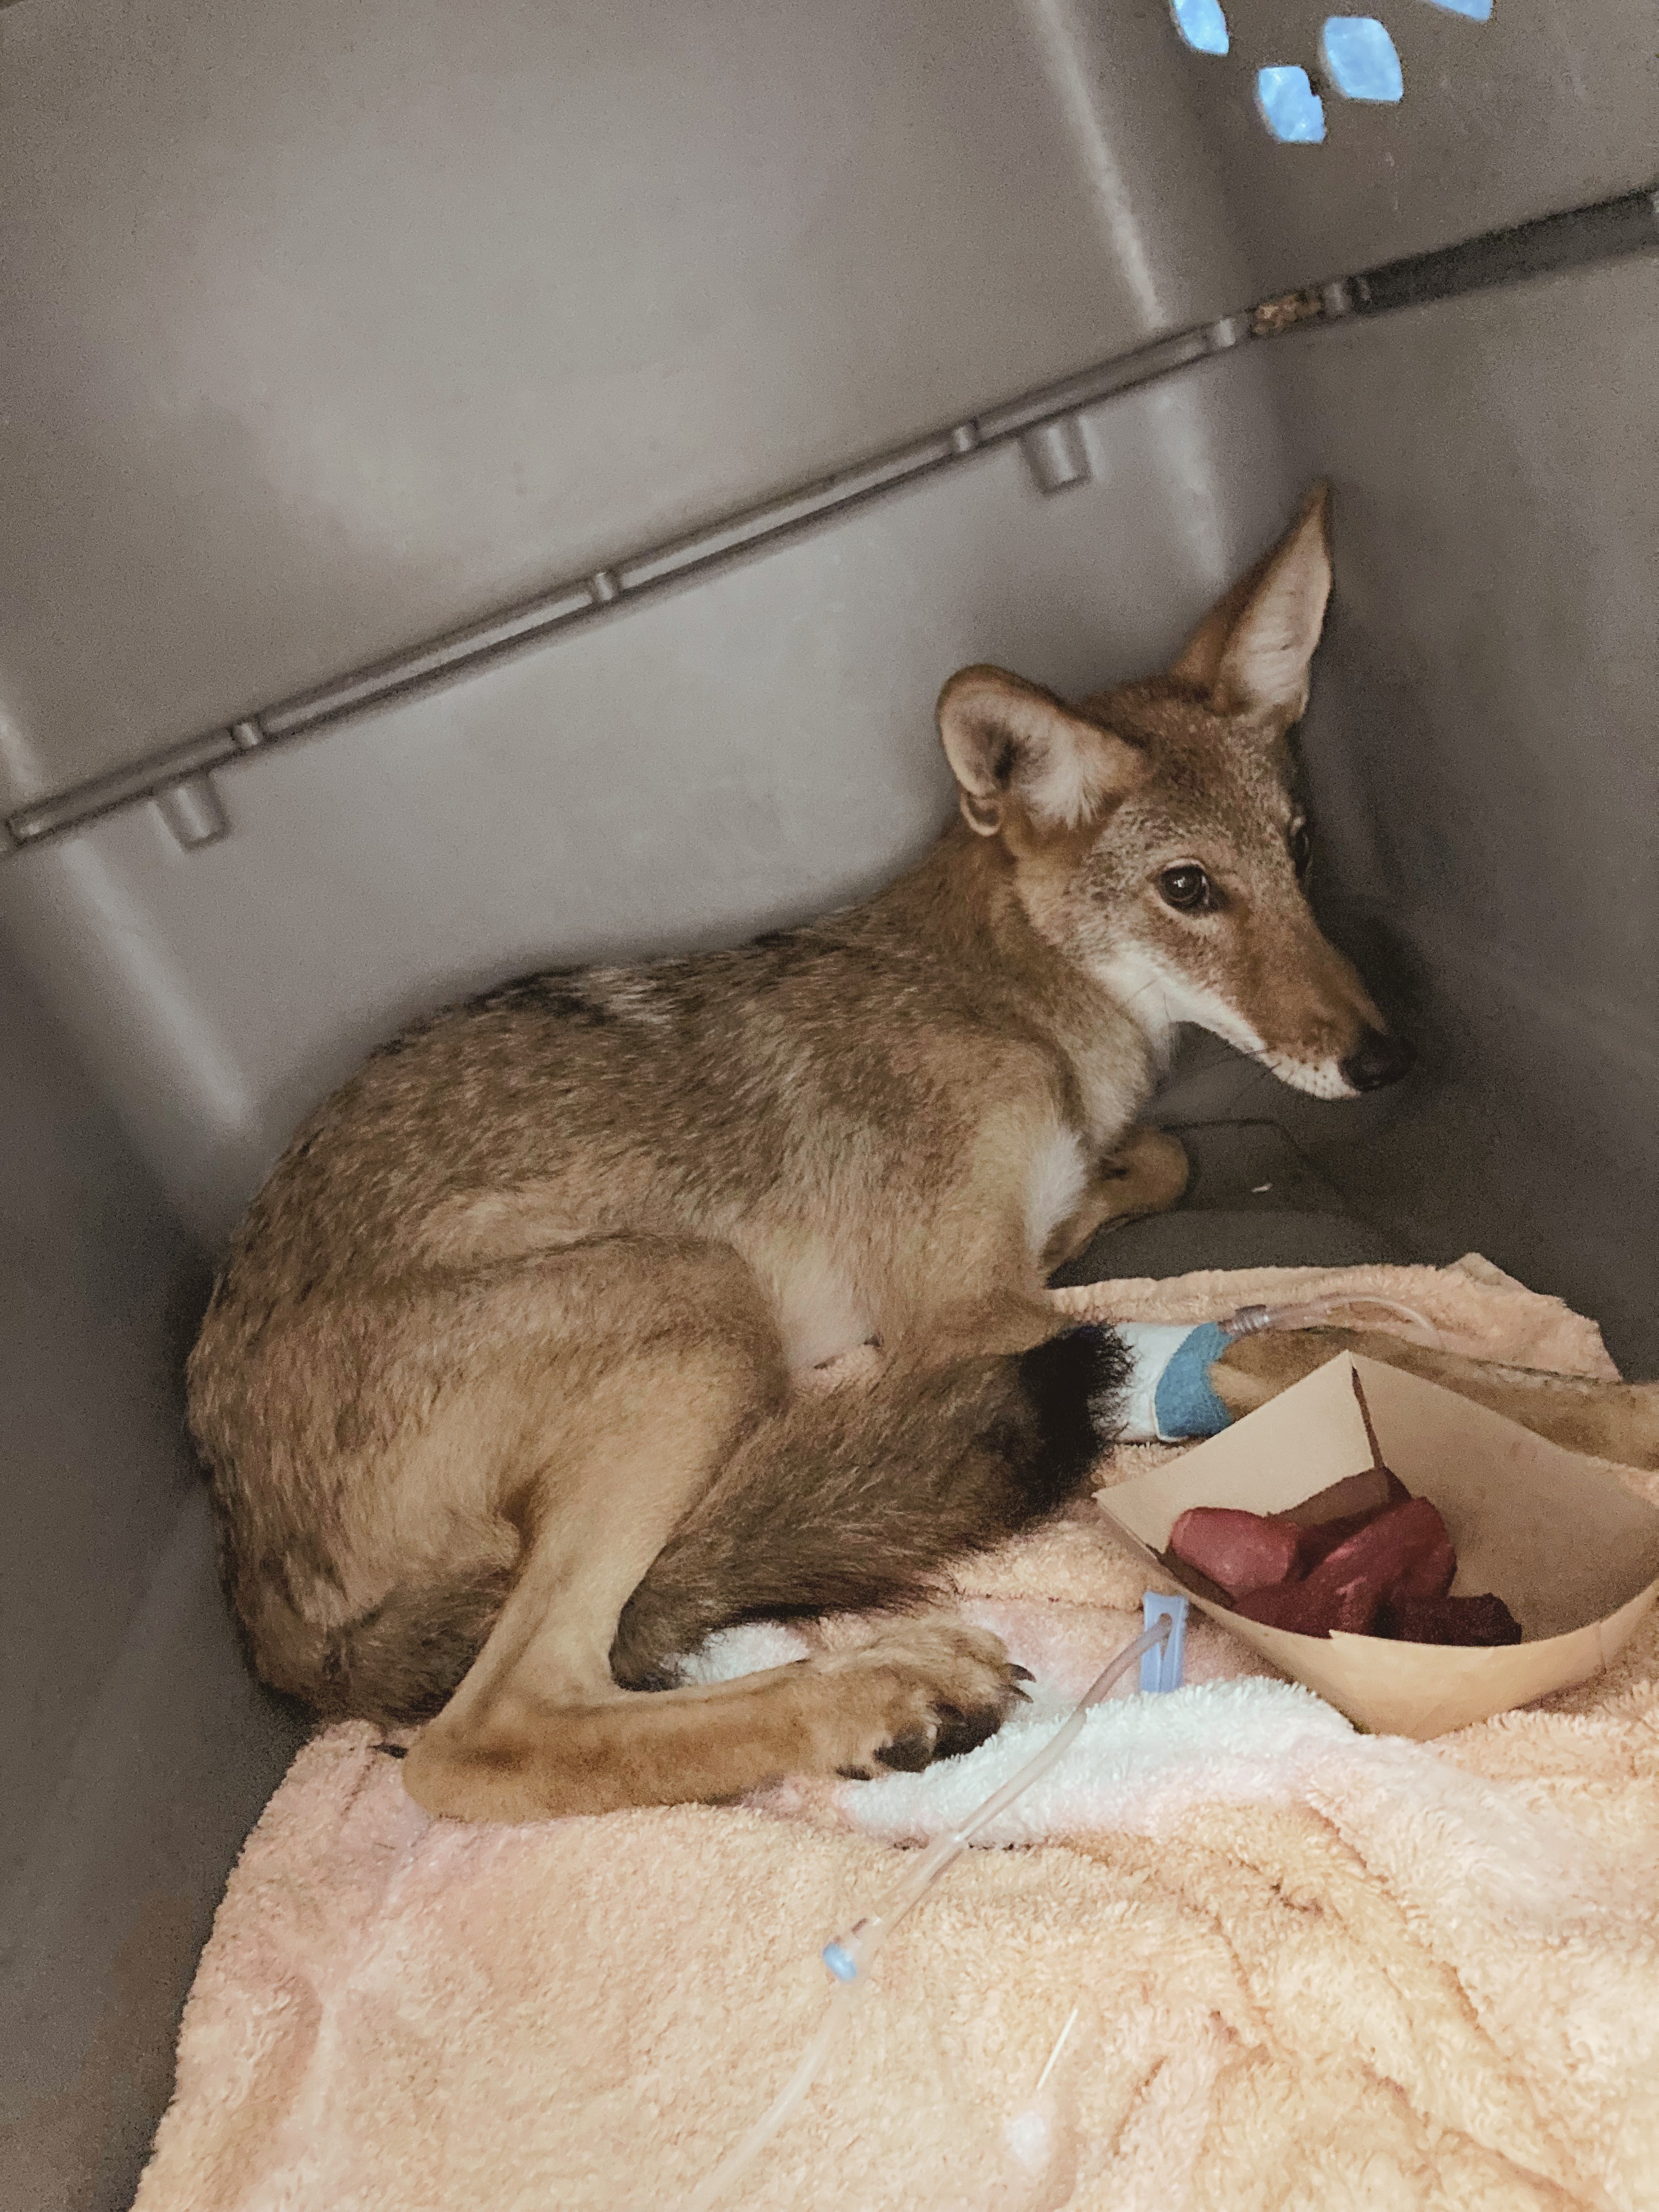 Rescue coyote curled up in her crate with a big plate of yummy food just after her medical exam. She looks scared, but she is in good hands.